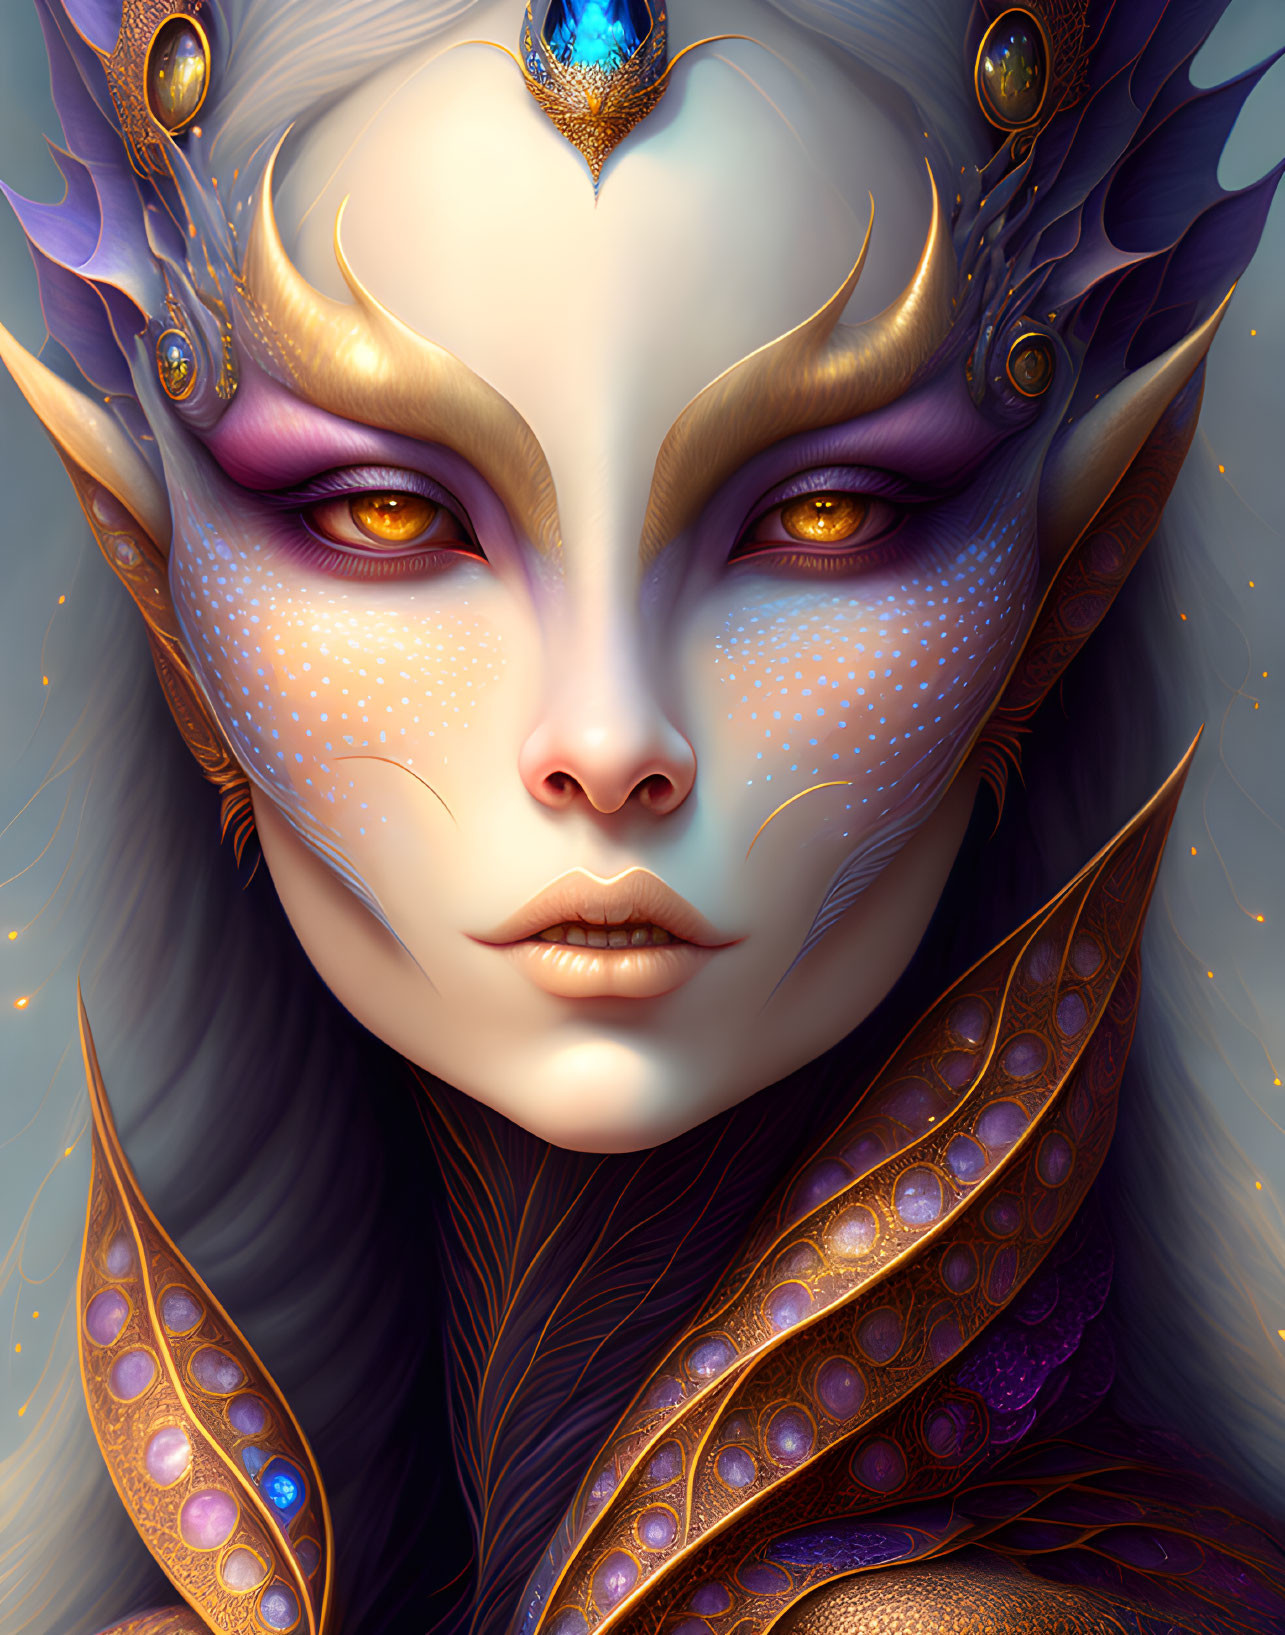 Detailed Fantasy Female Character with Elf-like Features and Ornate Purple & Gold Accessories